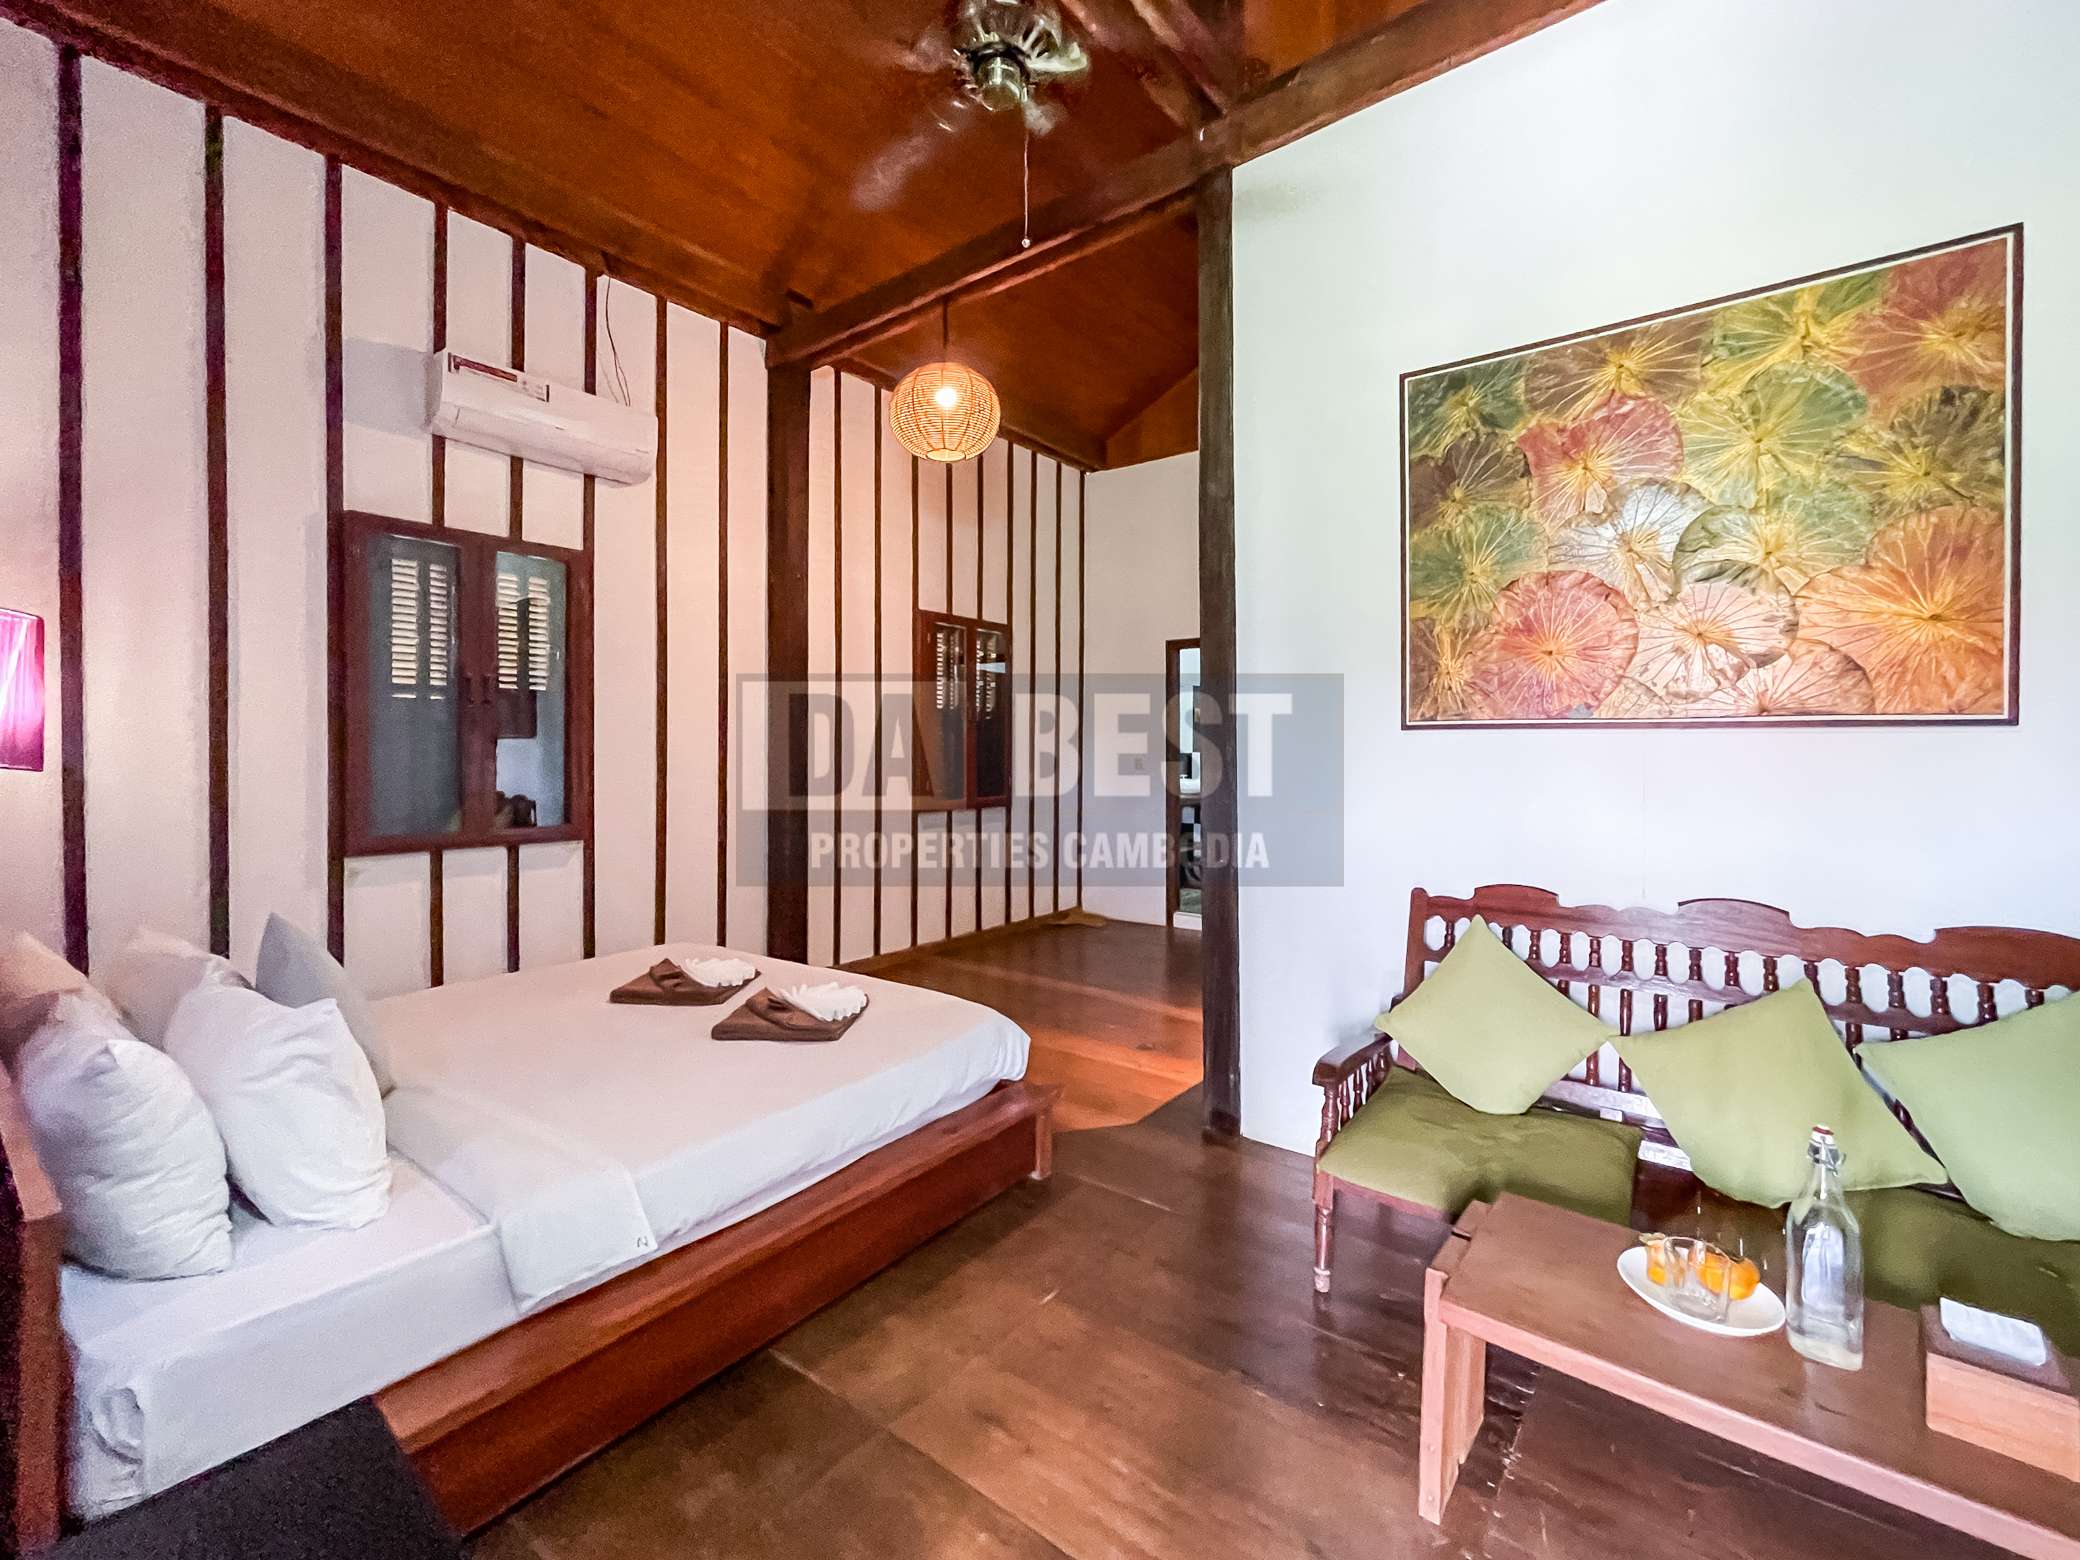 Wooden House 4 Bedrooms for Rent with Private Swimming Pool in Siem Reap - Bedroom